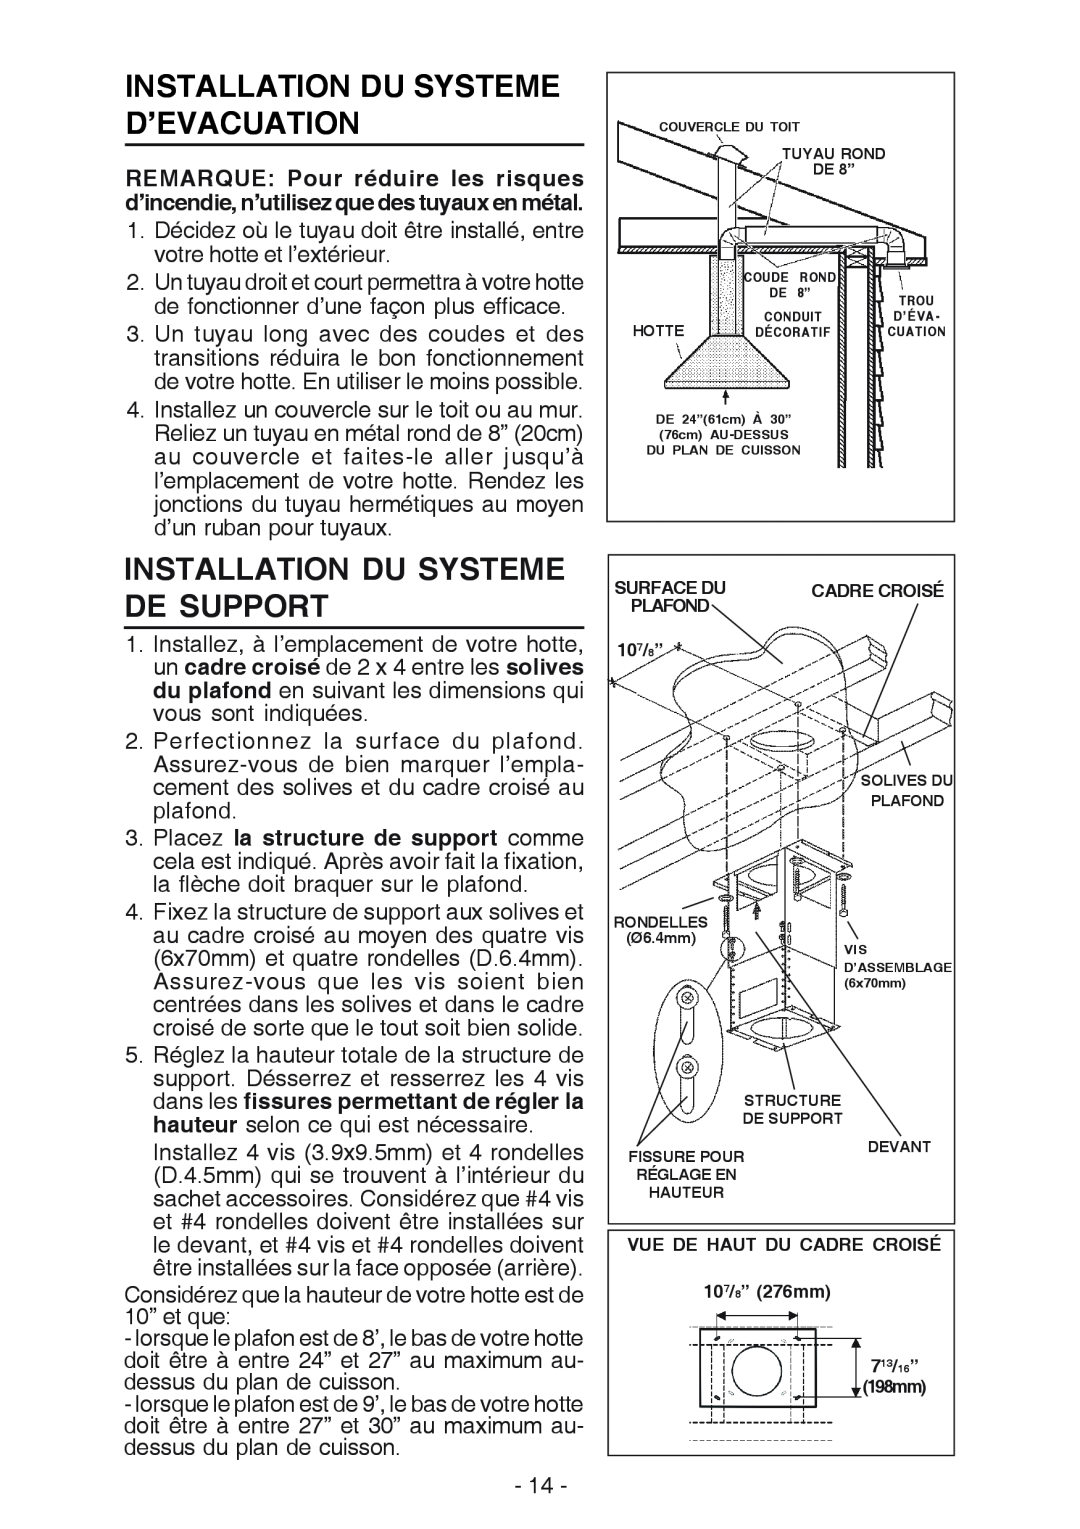 NuTone NP63000 manual Installation Du Systeme D’Evacuation, Installation Du Systeme De Support 